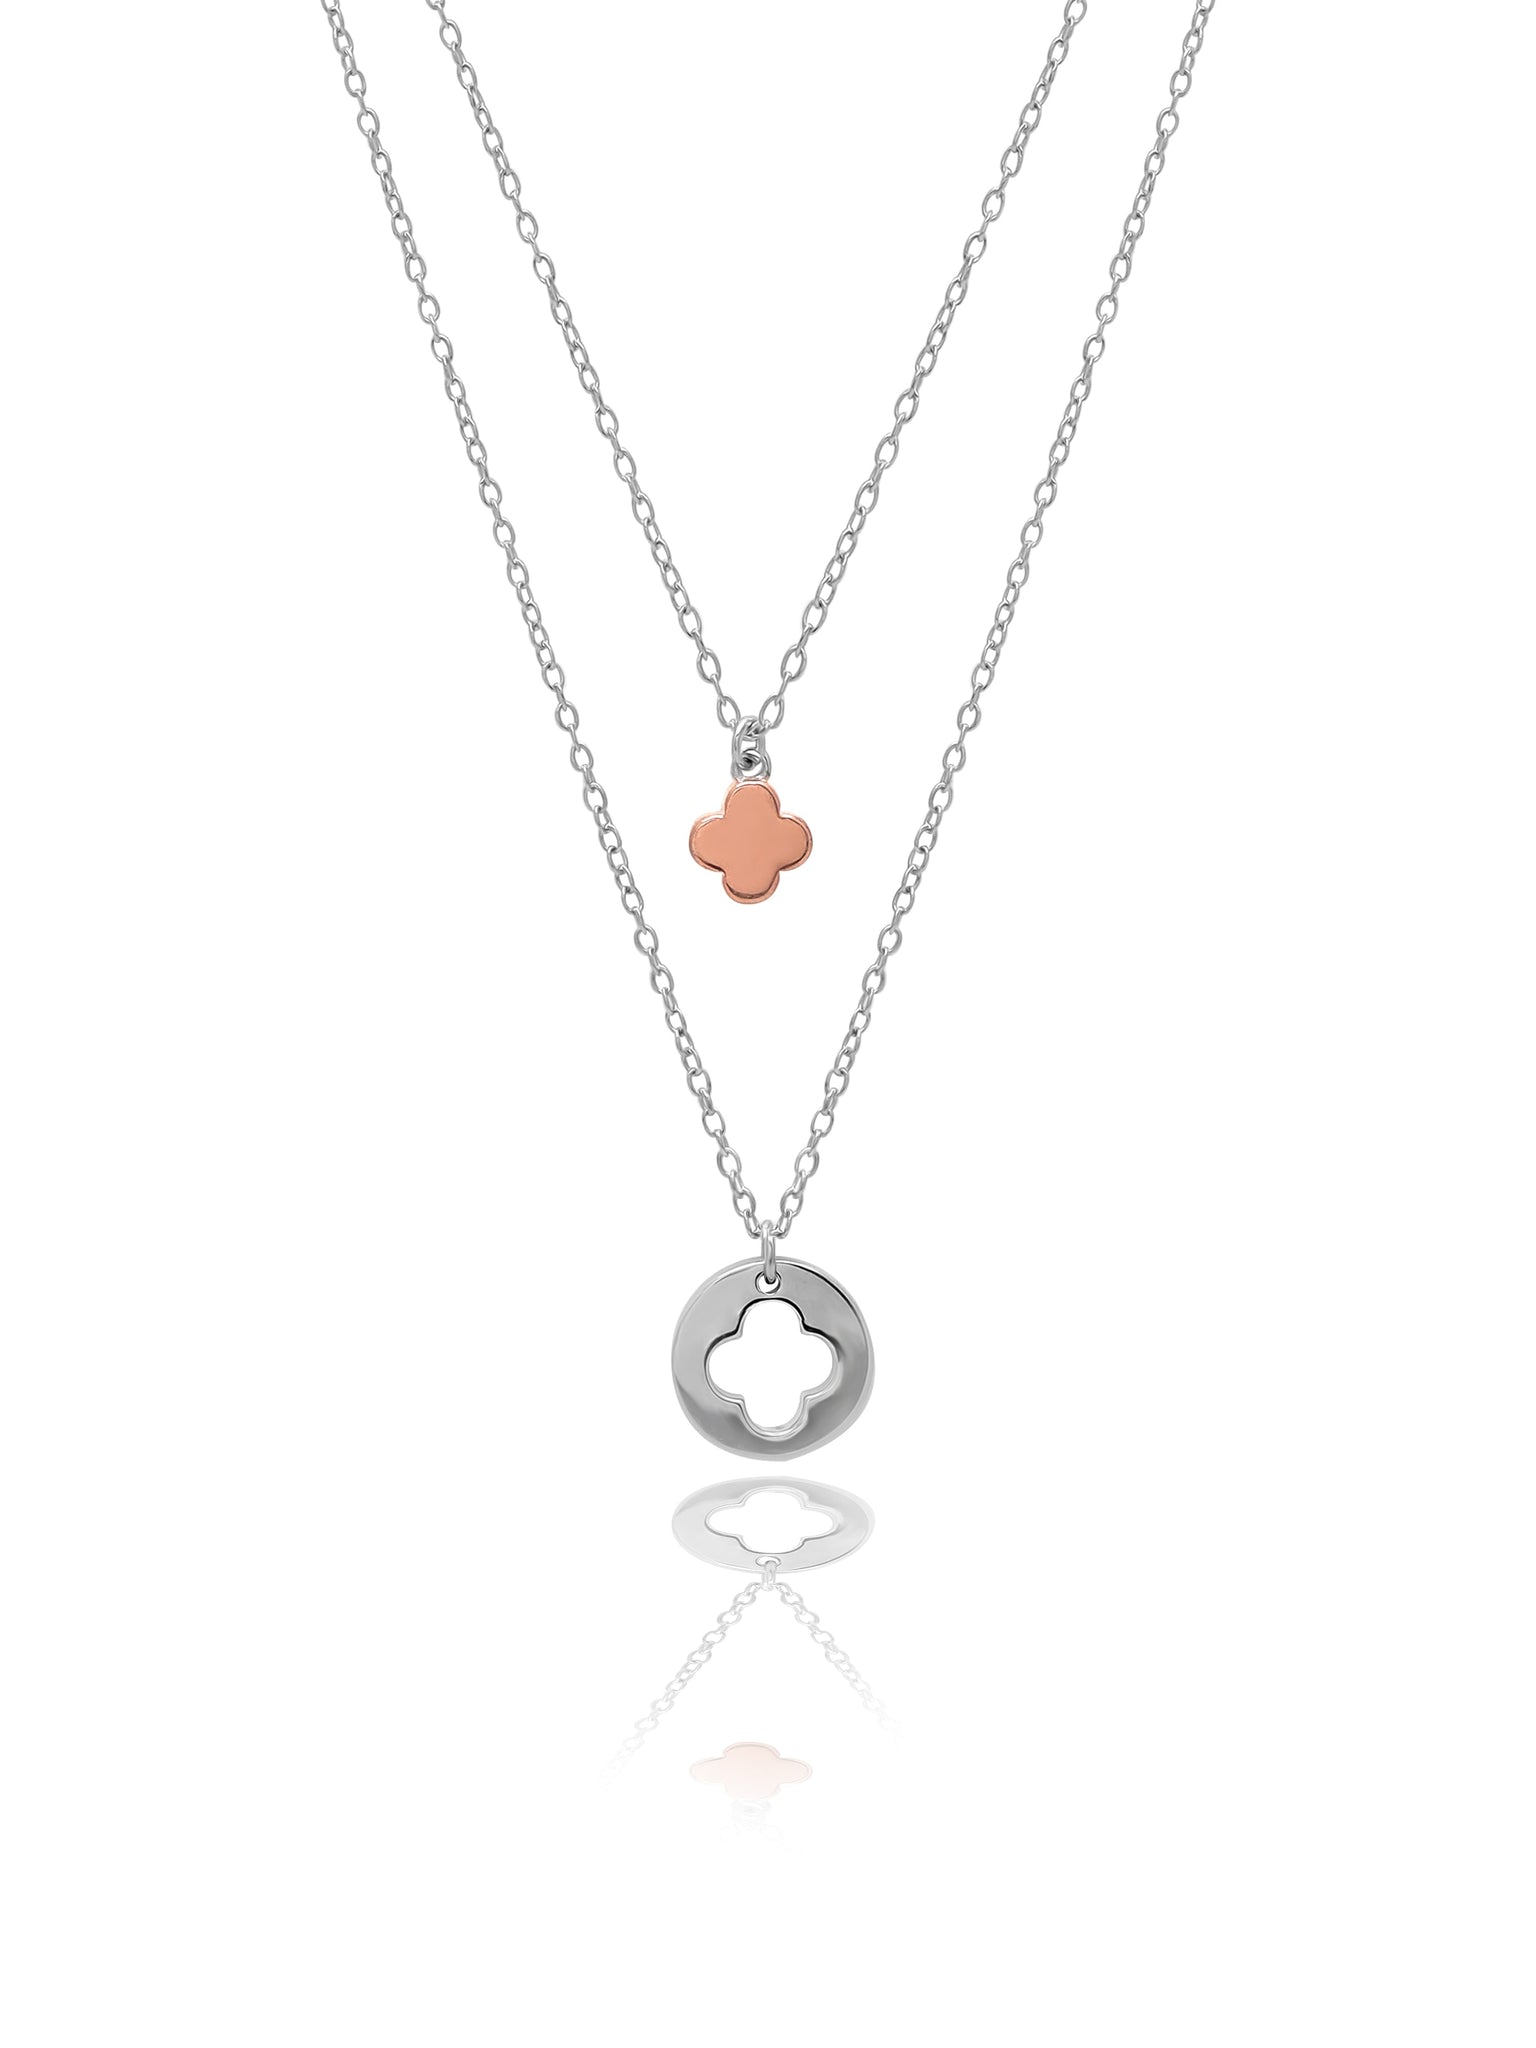 Dual Layered Clover Pendant With Link Chain 